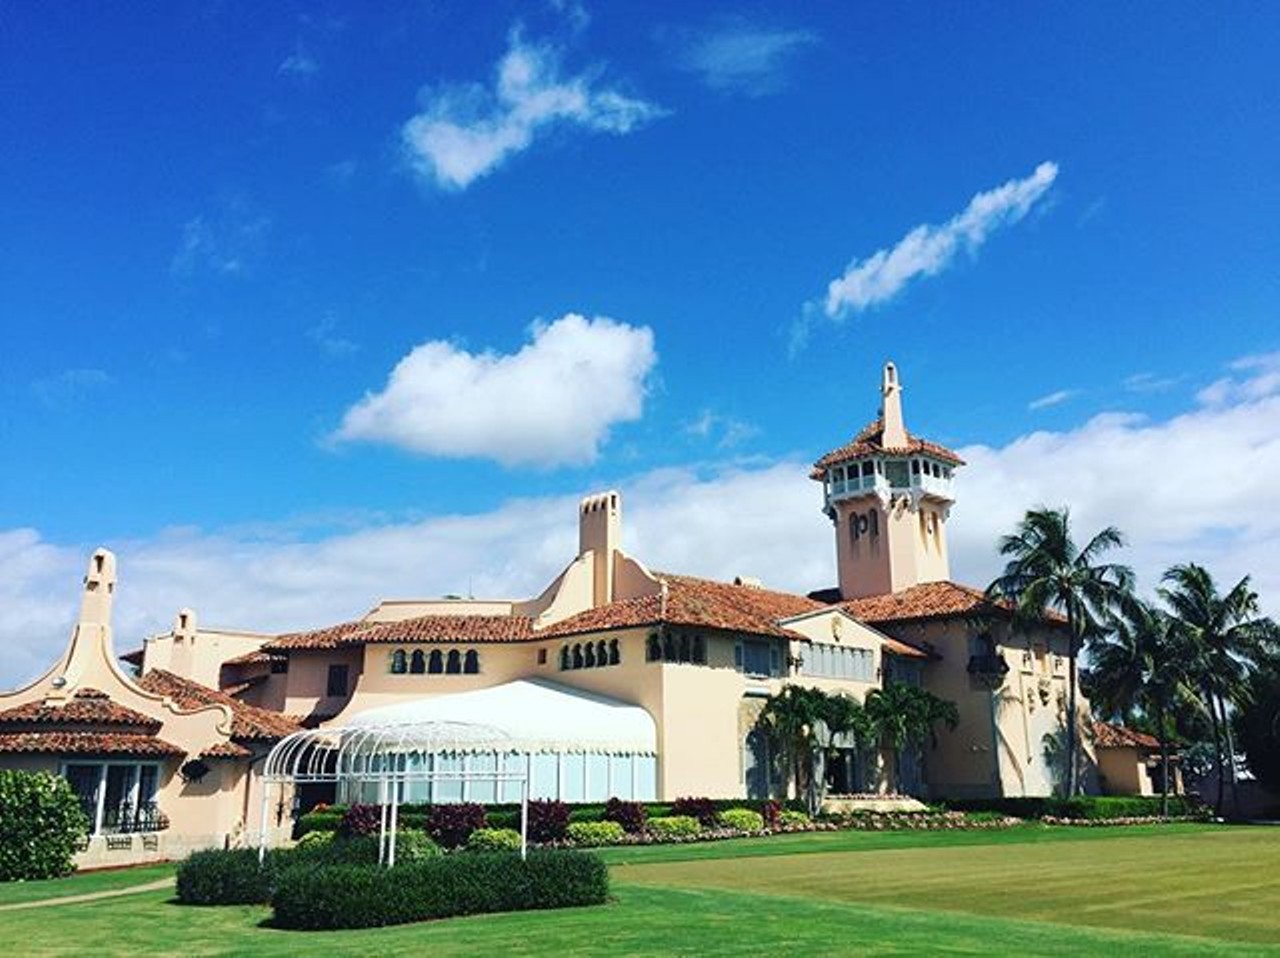 Mar-a-Lago
1100 S. Ocean Blvd., Palm Beach, 561-832-2600
Distance from Orlando: 2 hours and 39 minutes
Mar-a-Lago, meaning &#147;from lake to sea&#148; in Spanish, opened back in 1927 after four years of construction. The estate is known for its architecture and was used as a get away place for many notable people. The property is now privately owned by Donald Trump as an exclusive club.
Photo via boonou812/Instagram